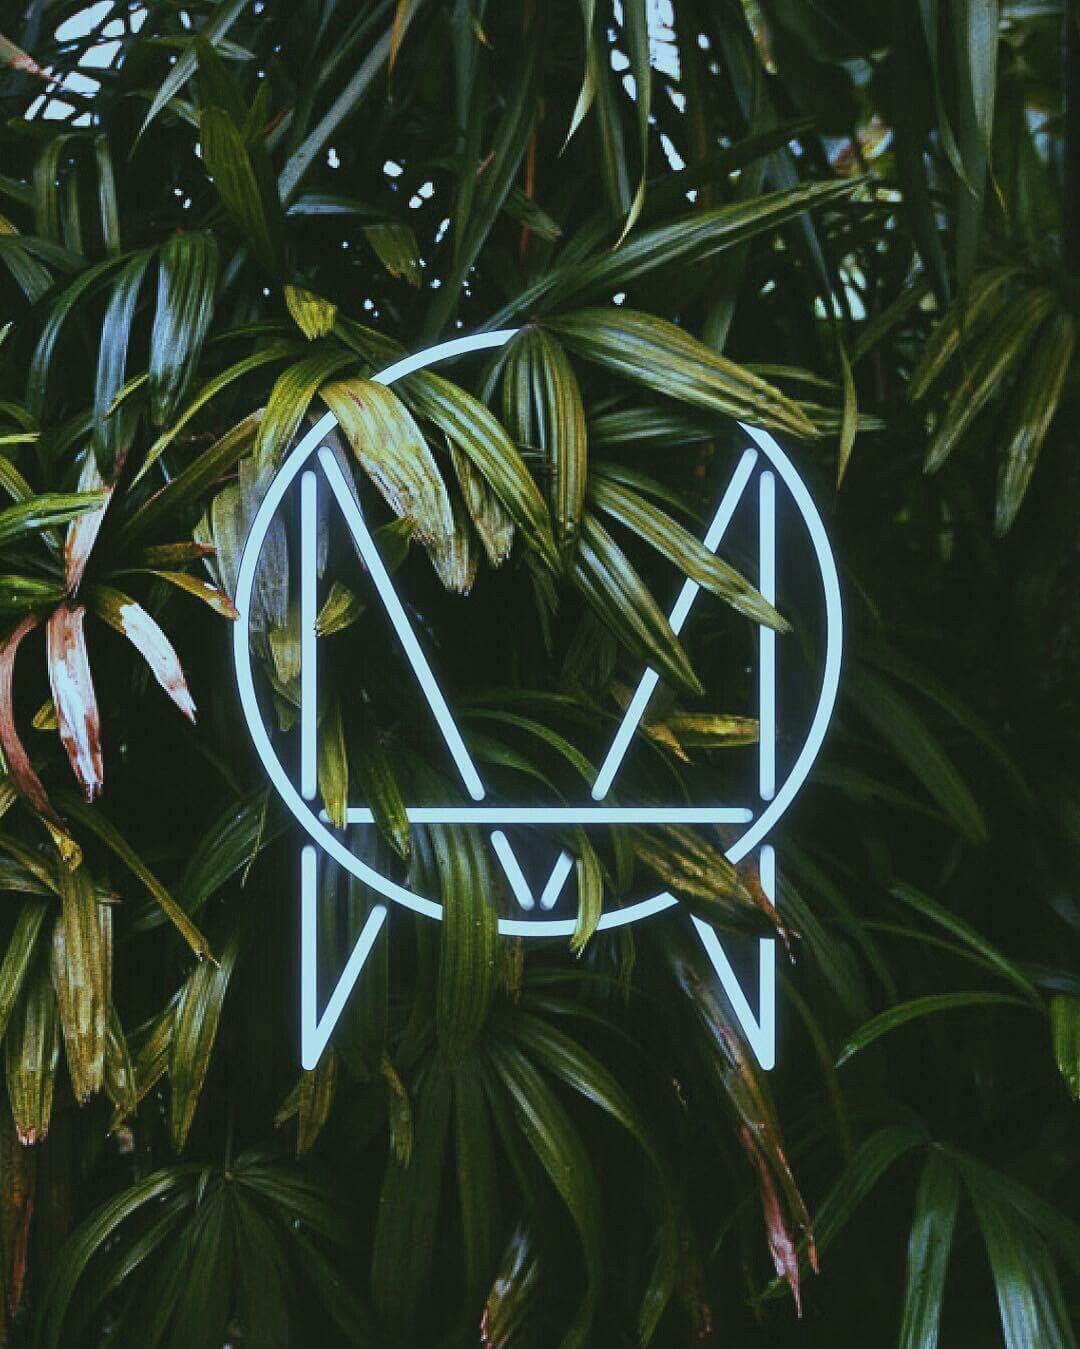 Best image about OWSLA. Vinyls, Logos and Weekender